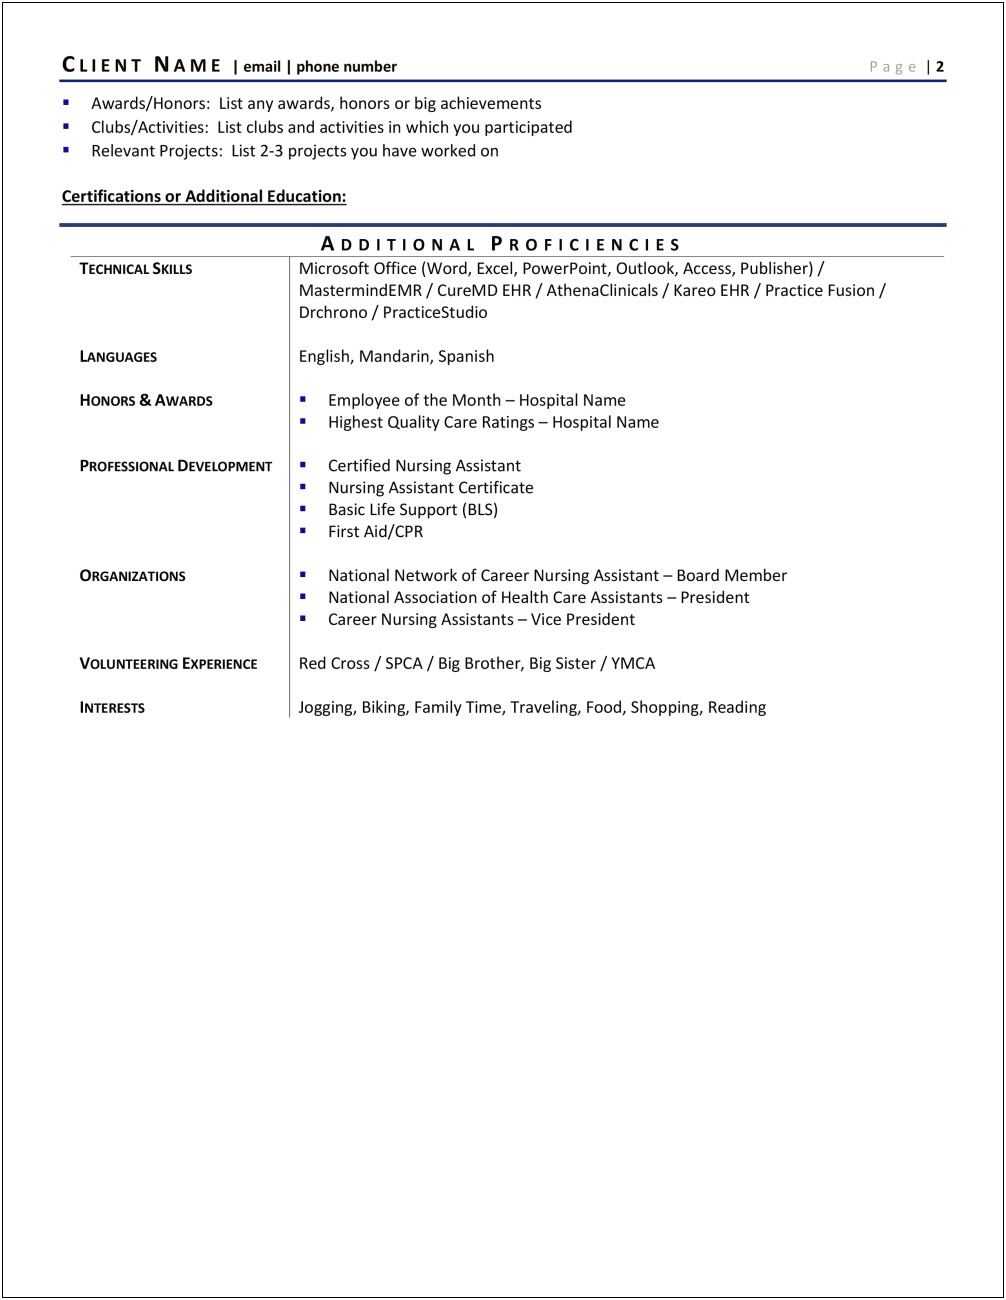 Free Resume Templates For Certified Nursing Assistant